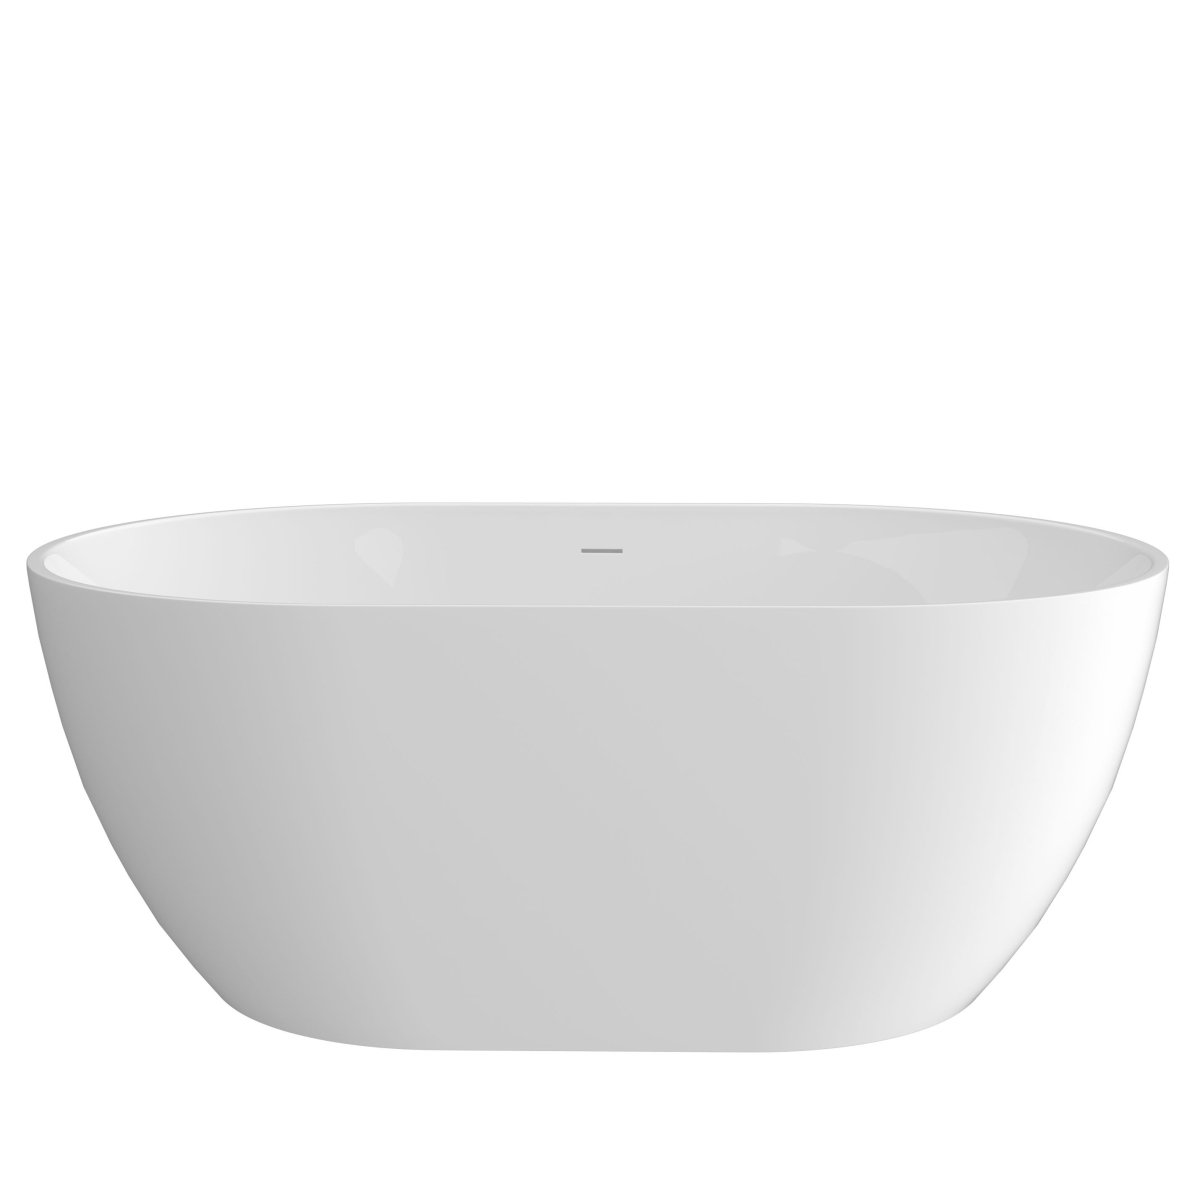 ExBrite 51" Acrylic Adjustable Bathtub with Integrated Slotted Overflow and Chrome Pop-up Drain Anti-clogging Gloss White - ExBriteUSA